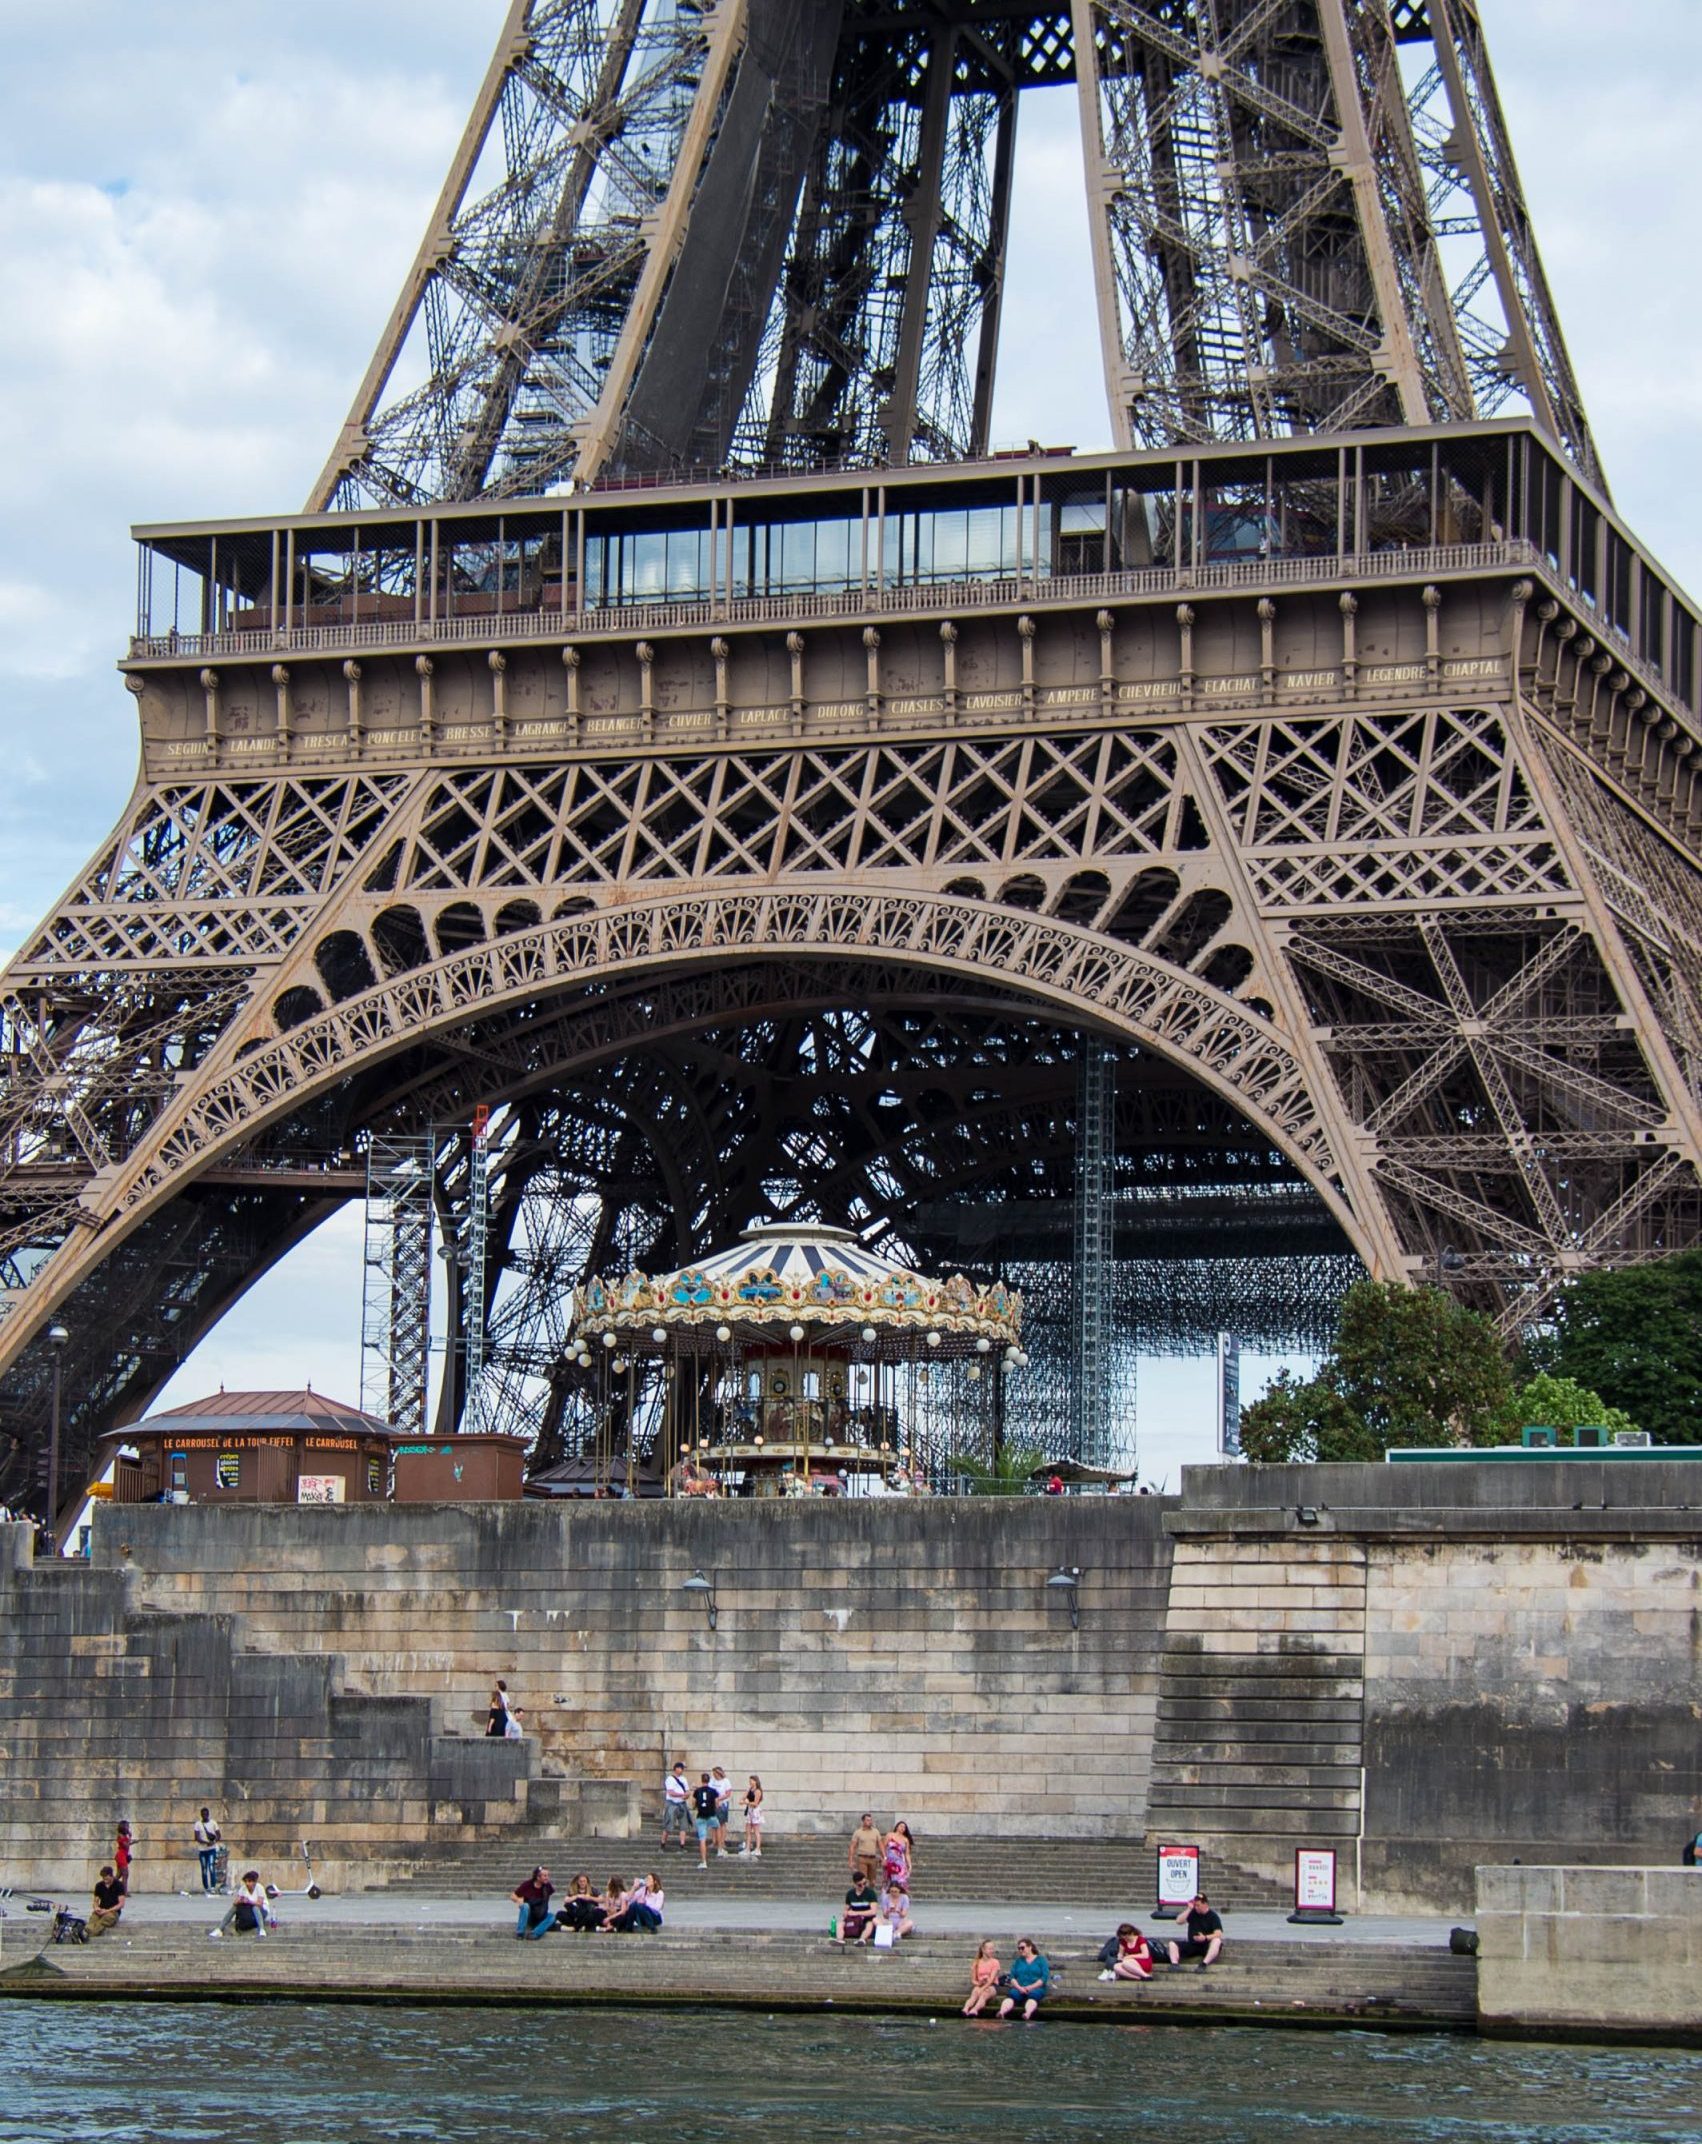 Eiffel Tower with Parisians on the river bank